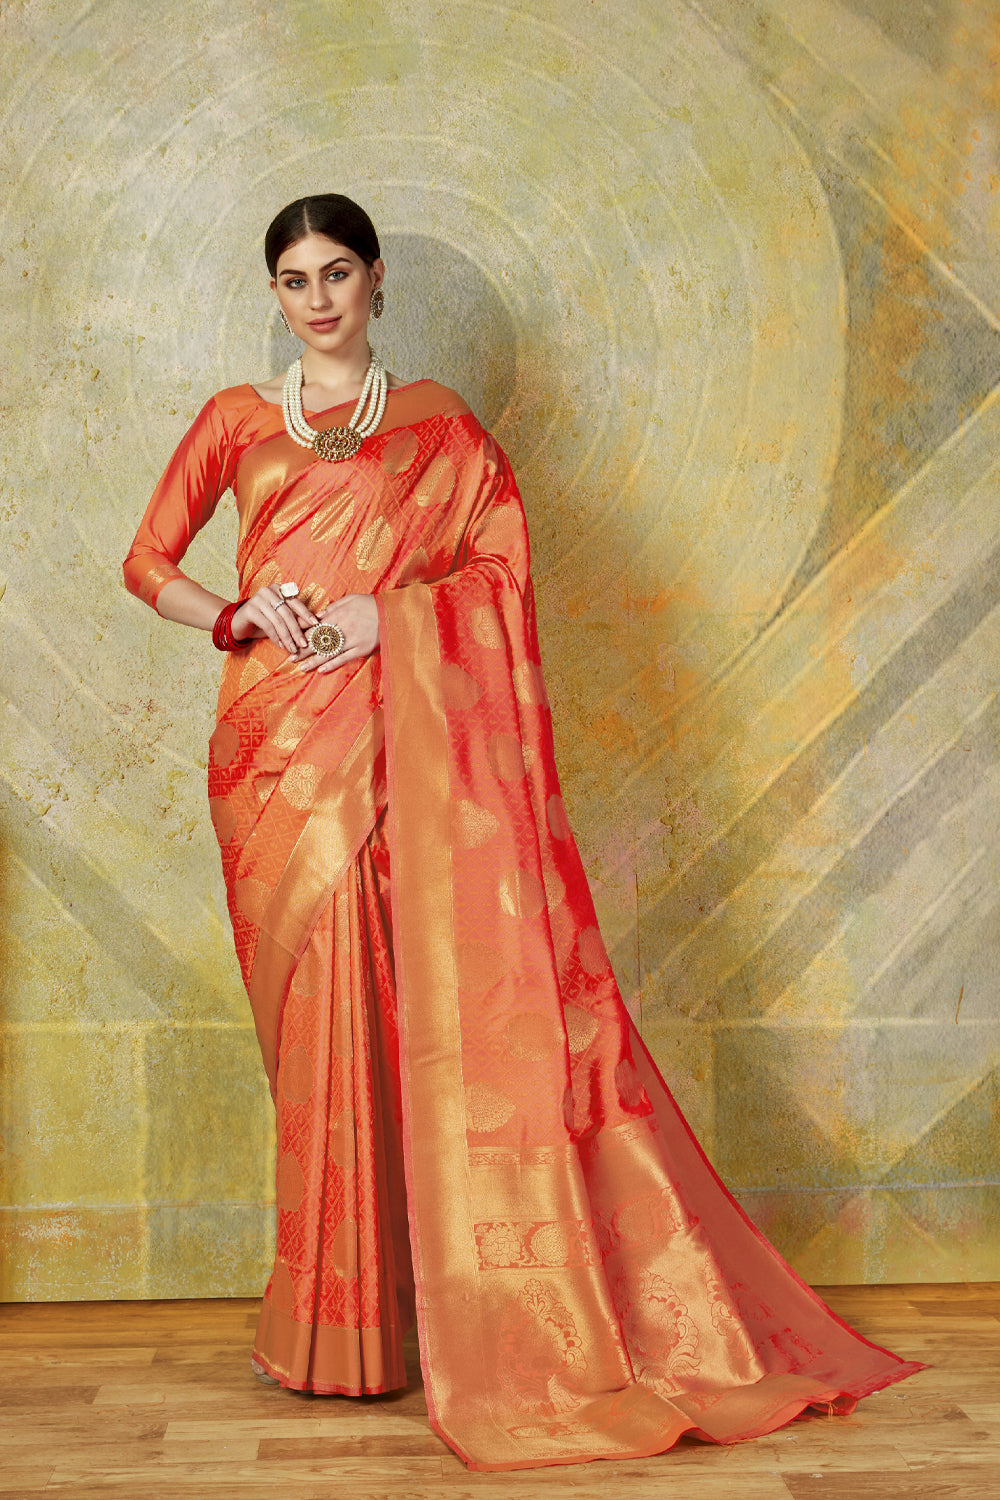 Gorgeous Shaded Traditional Kanjeevaram Silk Sarees to Get A Marvelous Look